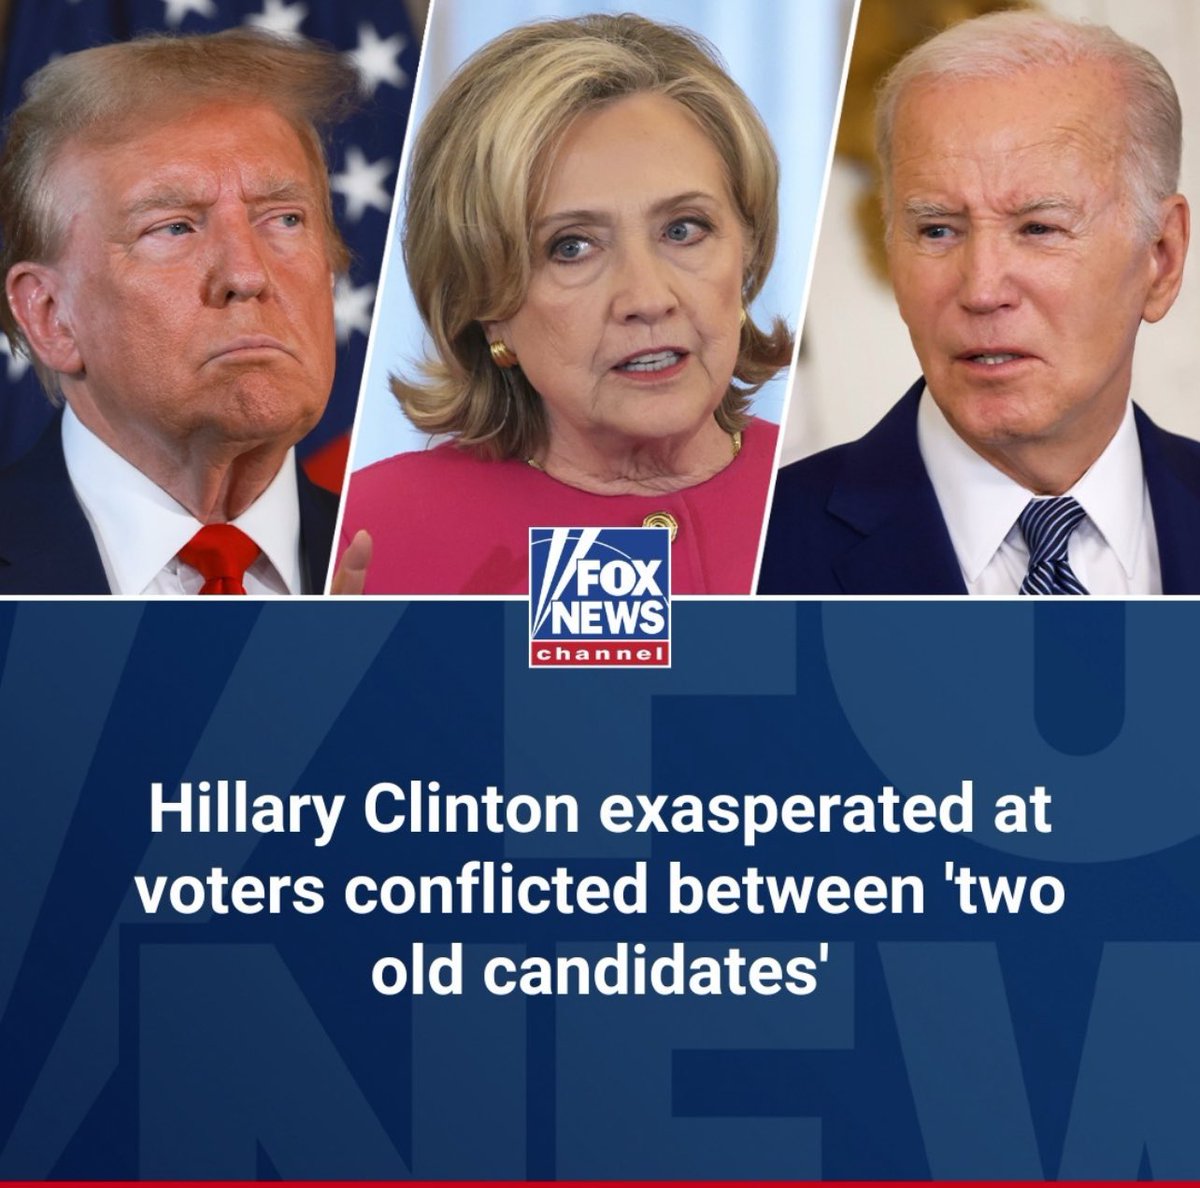 This isn’t “between 2 old candidates”. It’s being mentally fit for the job, low inflation, economic security, secure borders and world peace which should is why most Americans want Trump unless you are a far left liberal.